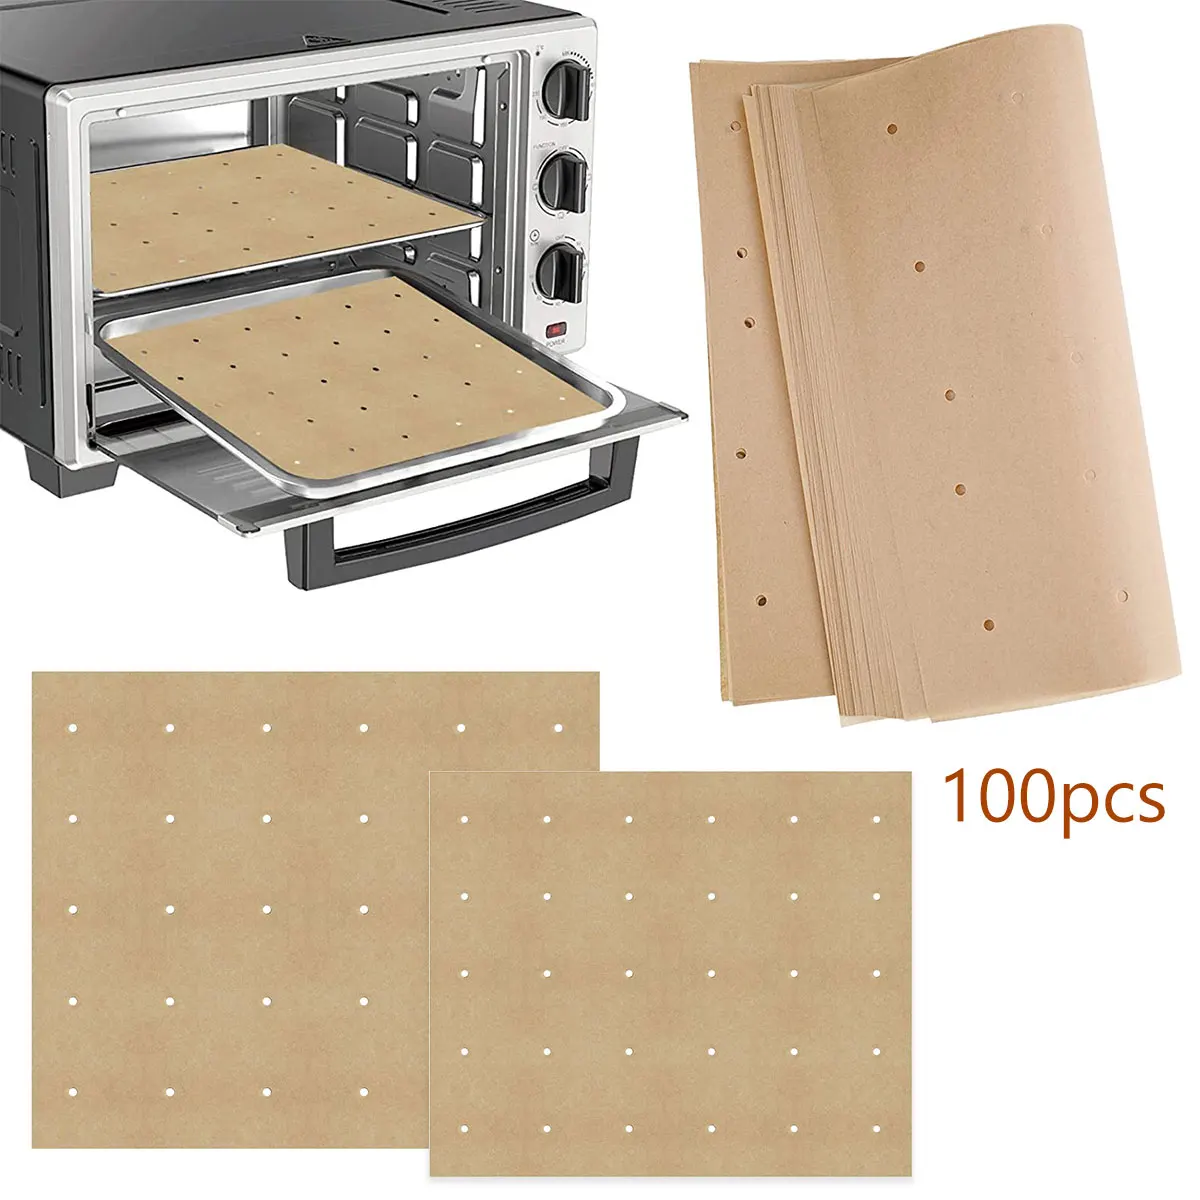 

100Pcs Air Fryer Paper Unbleached Air Fryer Parchment Paper Pads High Temperature Resistant Perforated Square Air Fryer Pads for